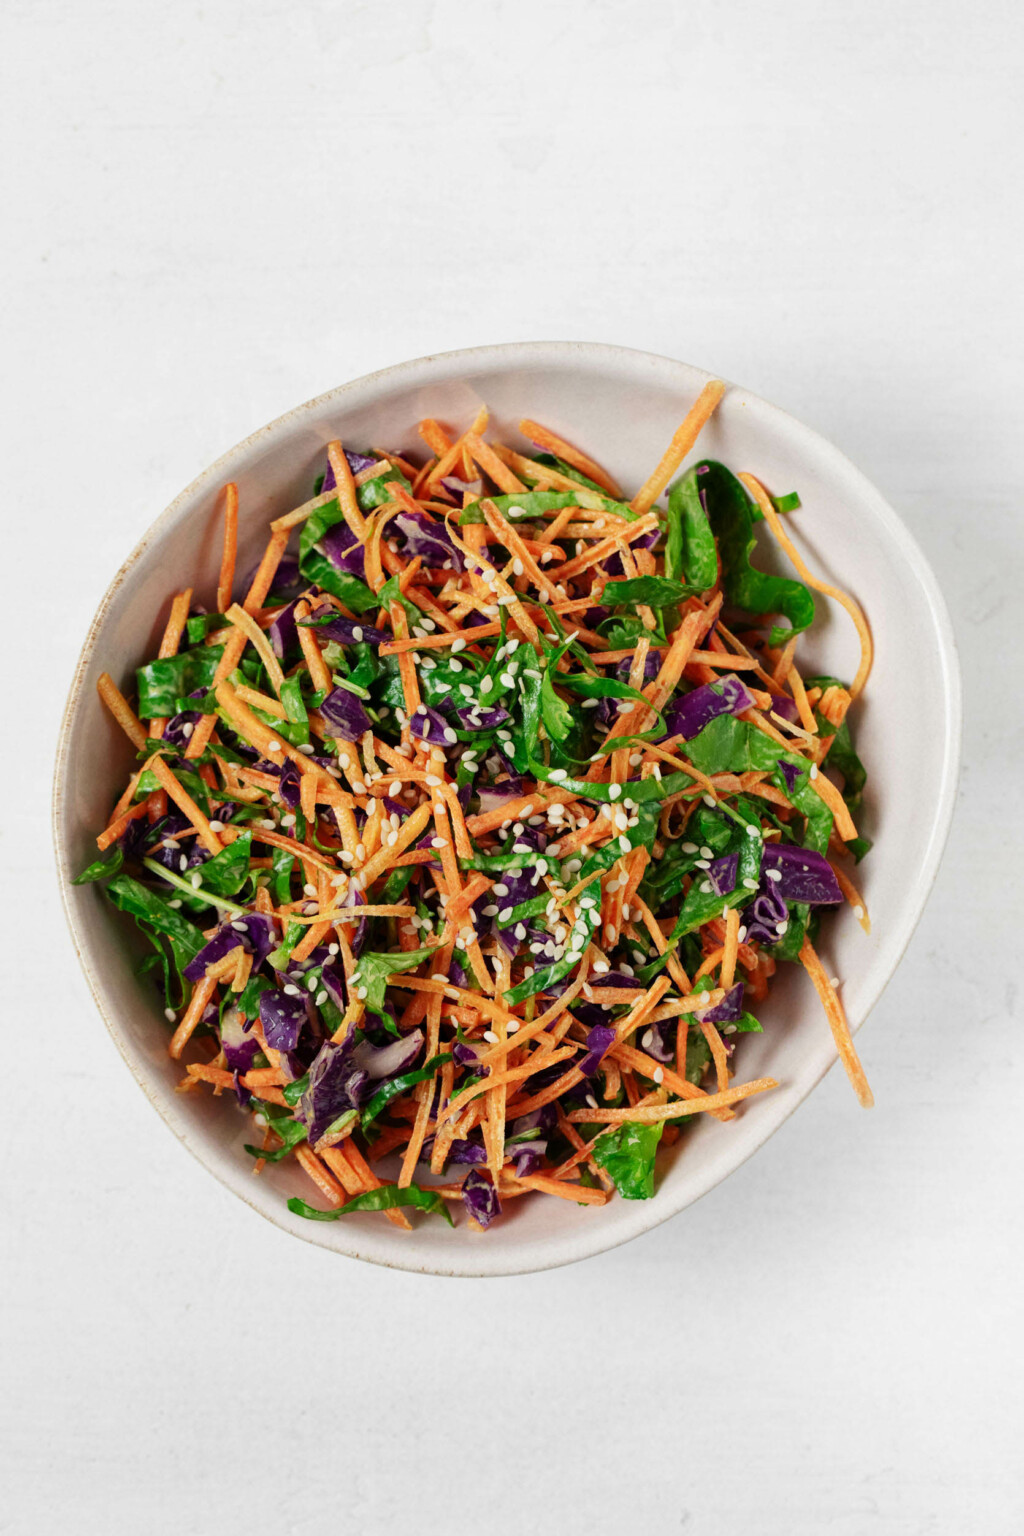 An overhead image of a bowl of colorful turmeric slaw, prepared with mixed vegetables and garnished with sesame seeds.